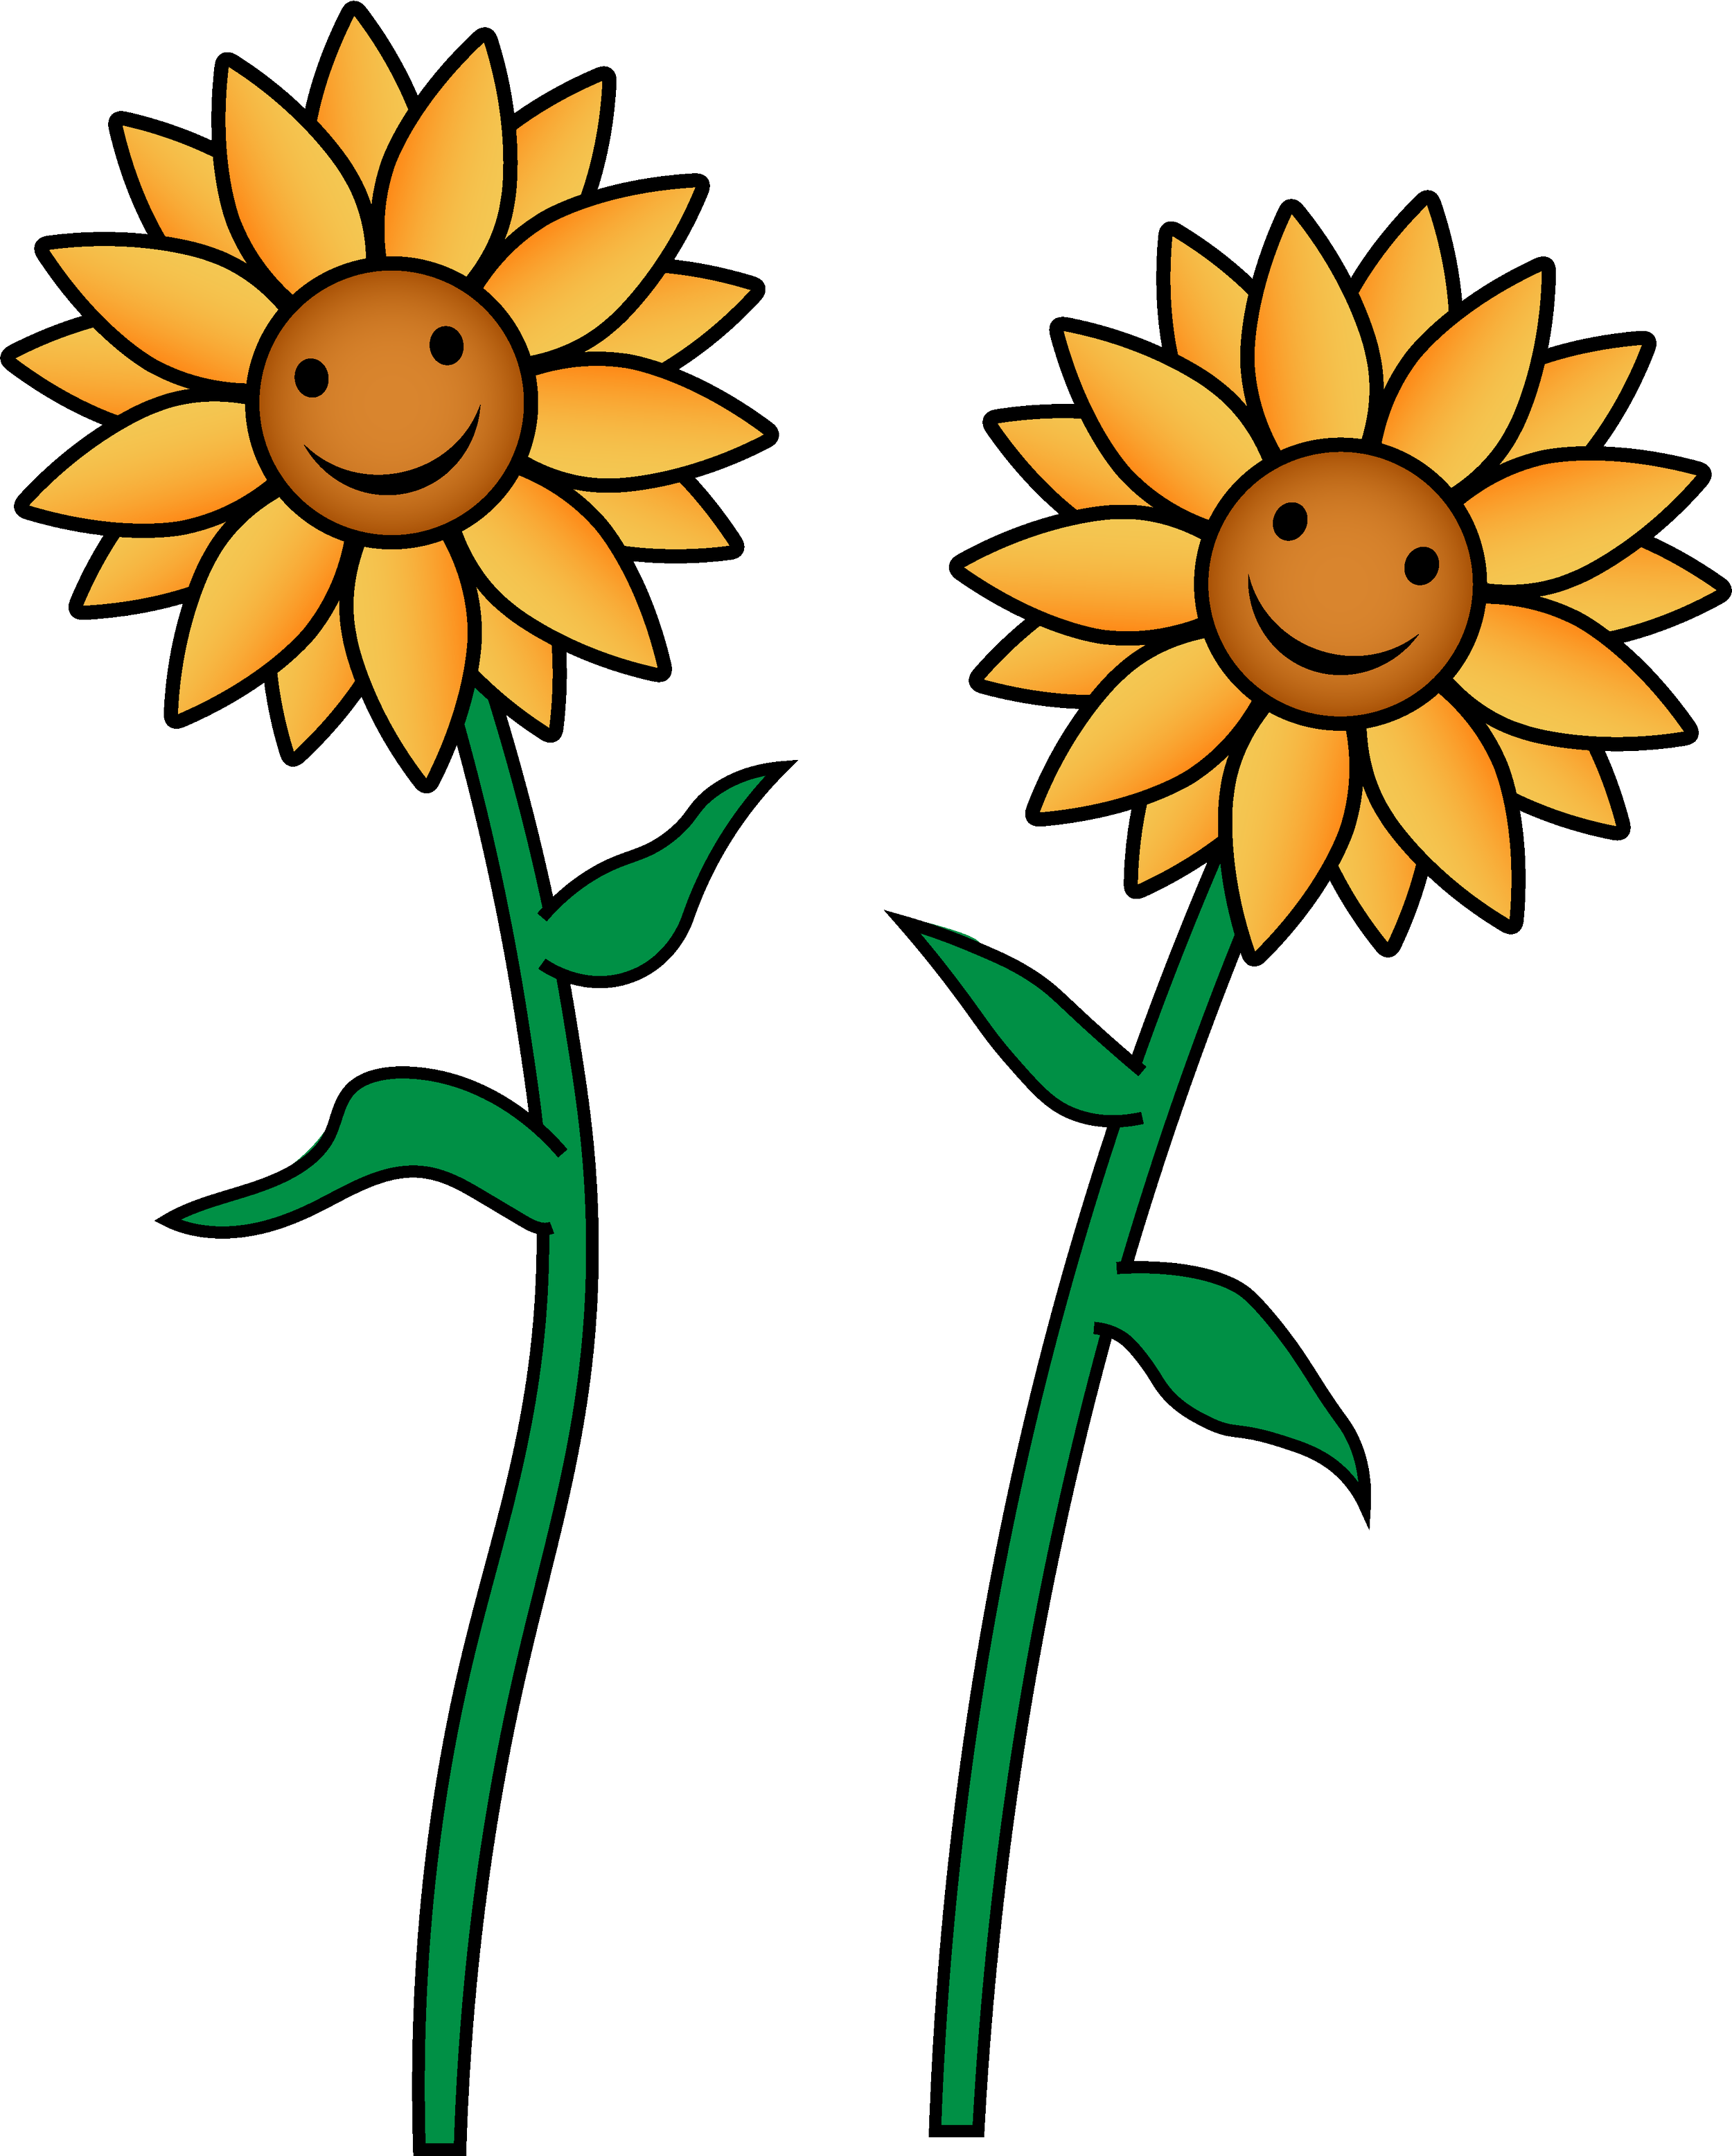 Sunflowers.png